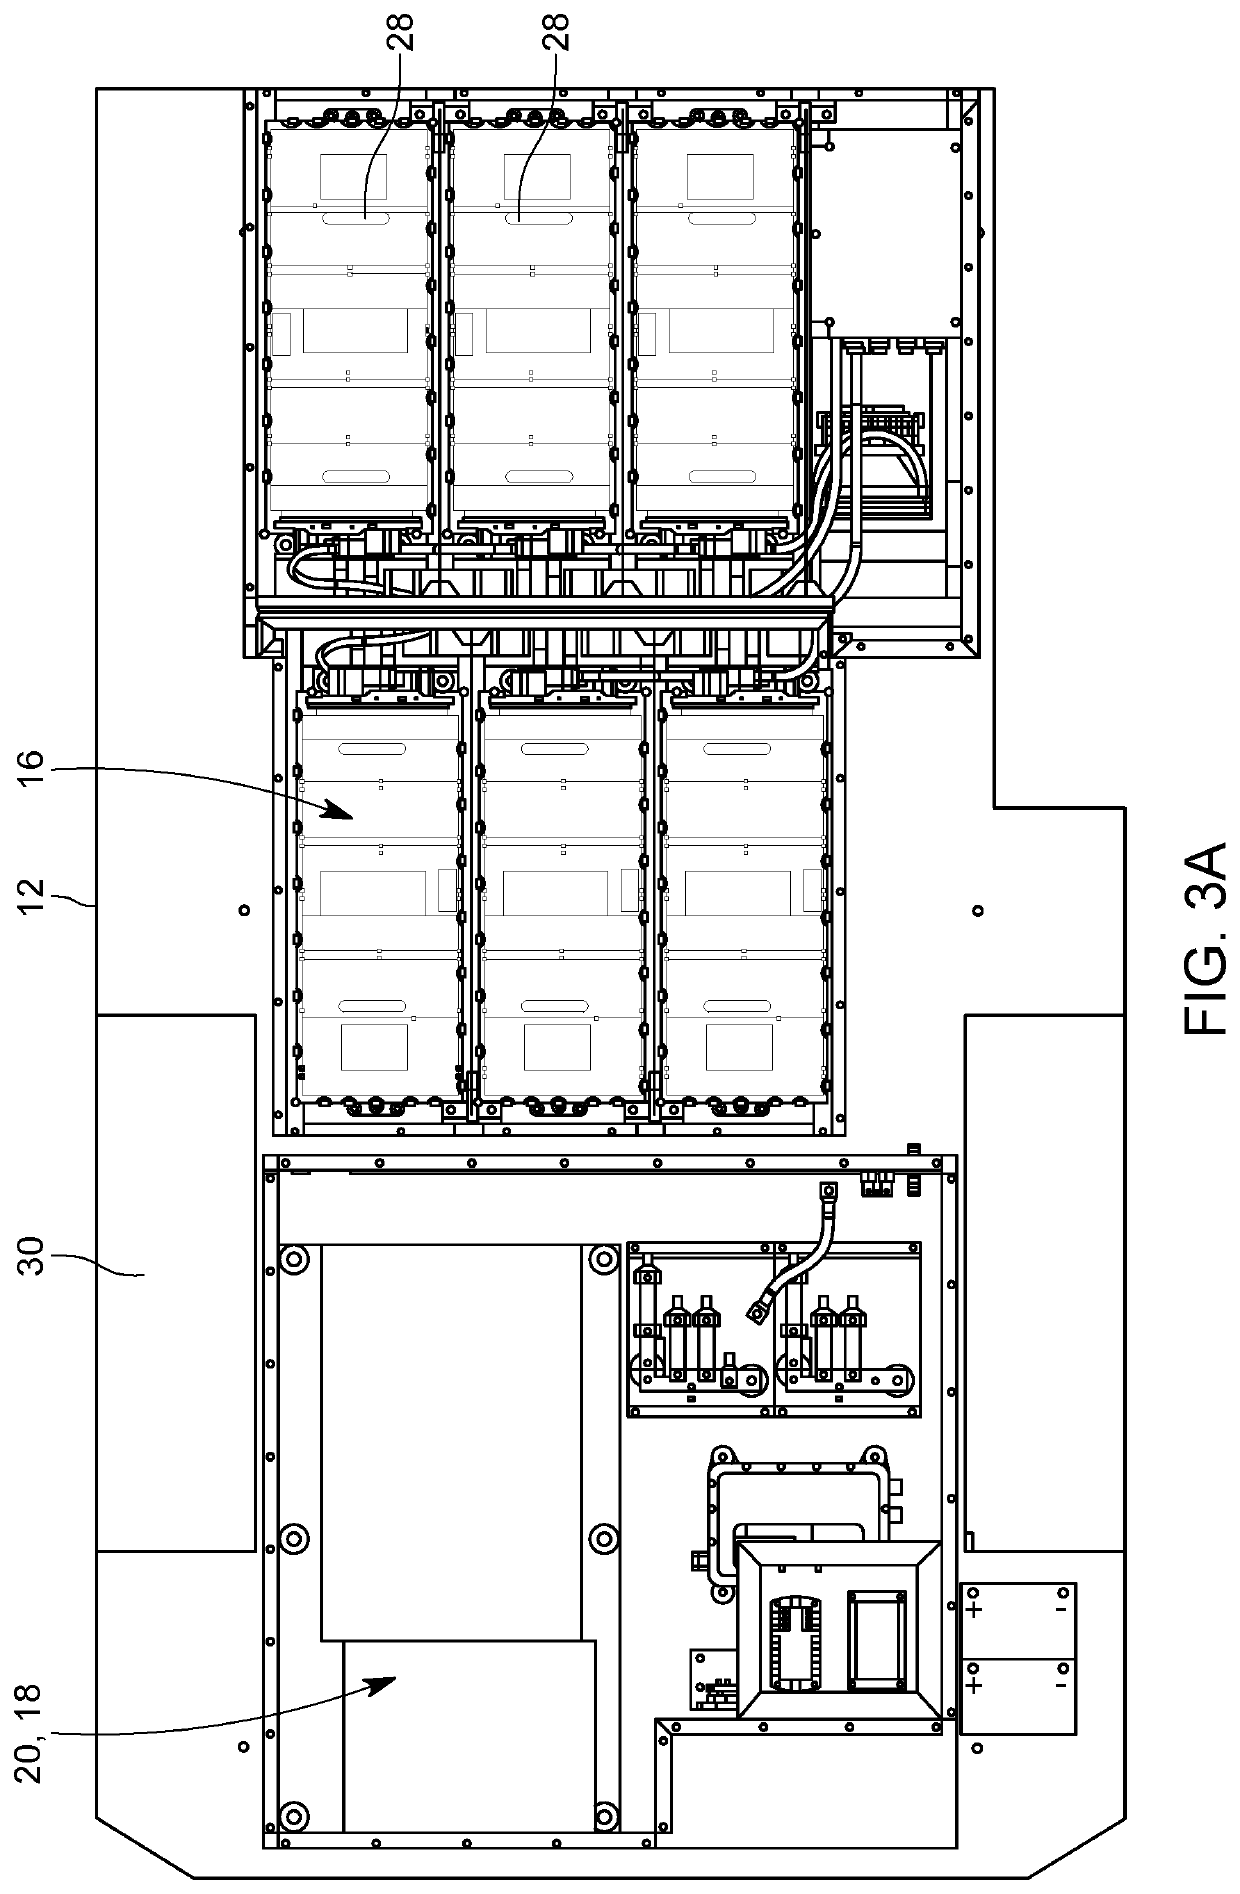 Vehicle-based charging system for electric vehicles